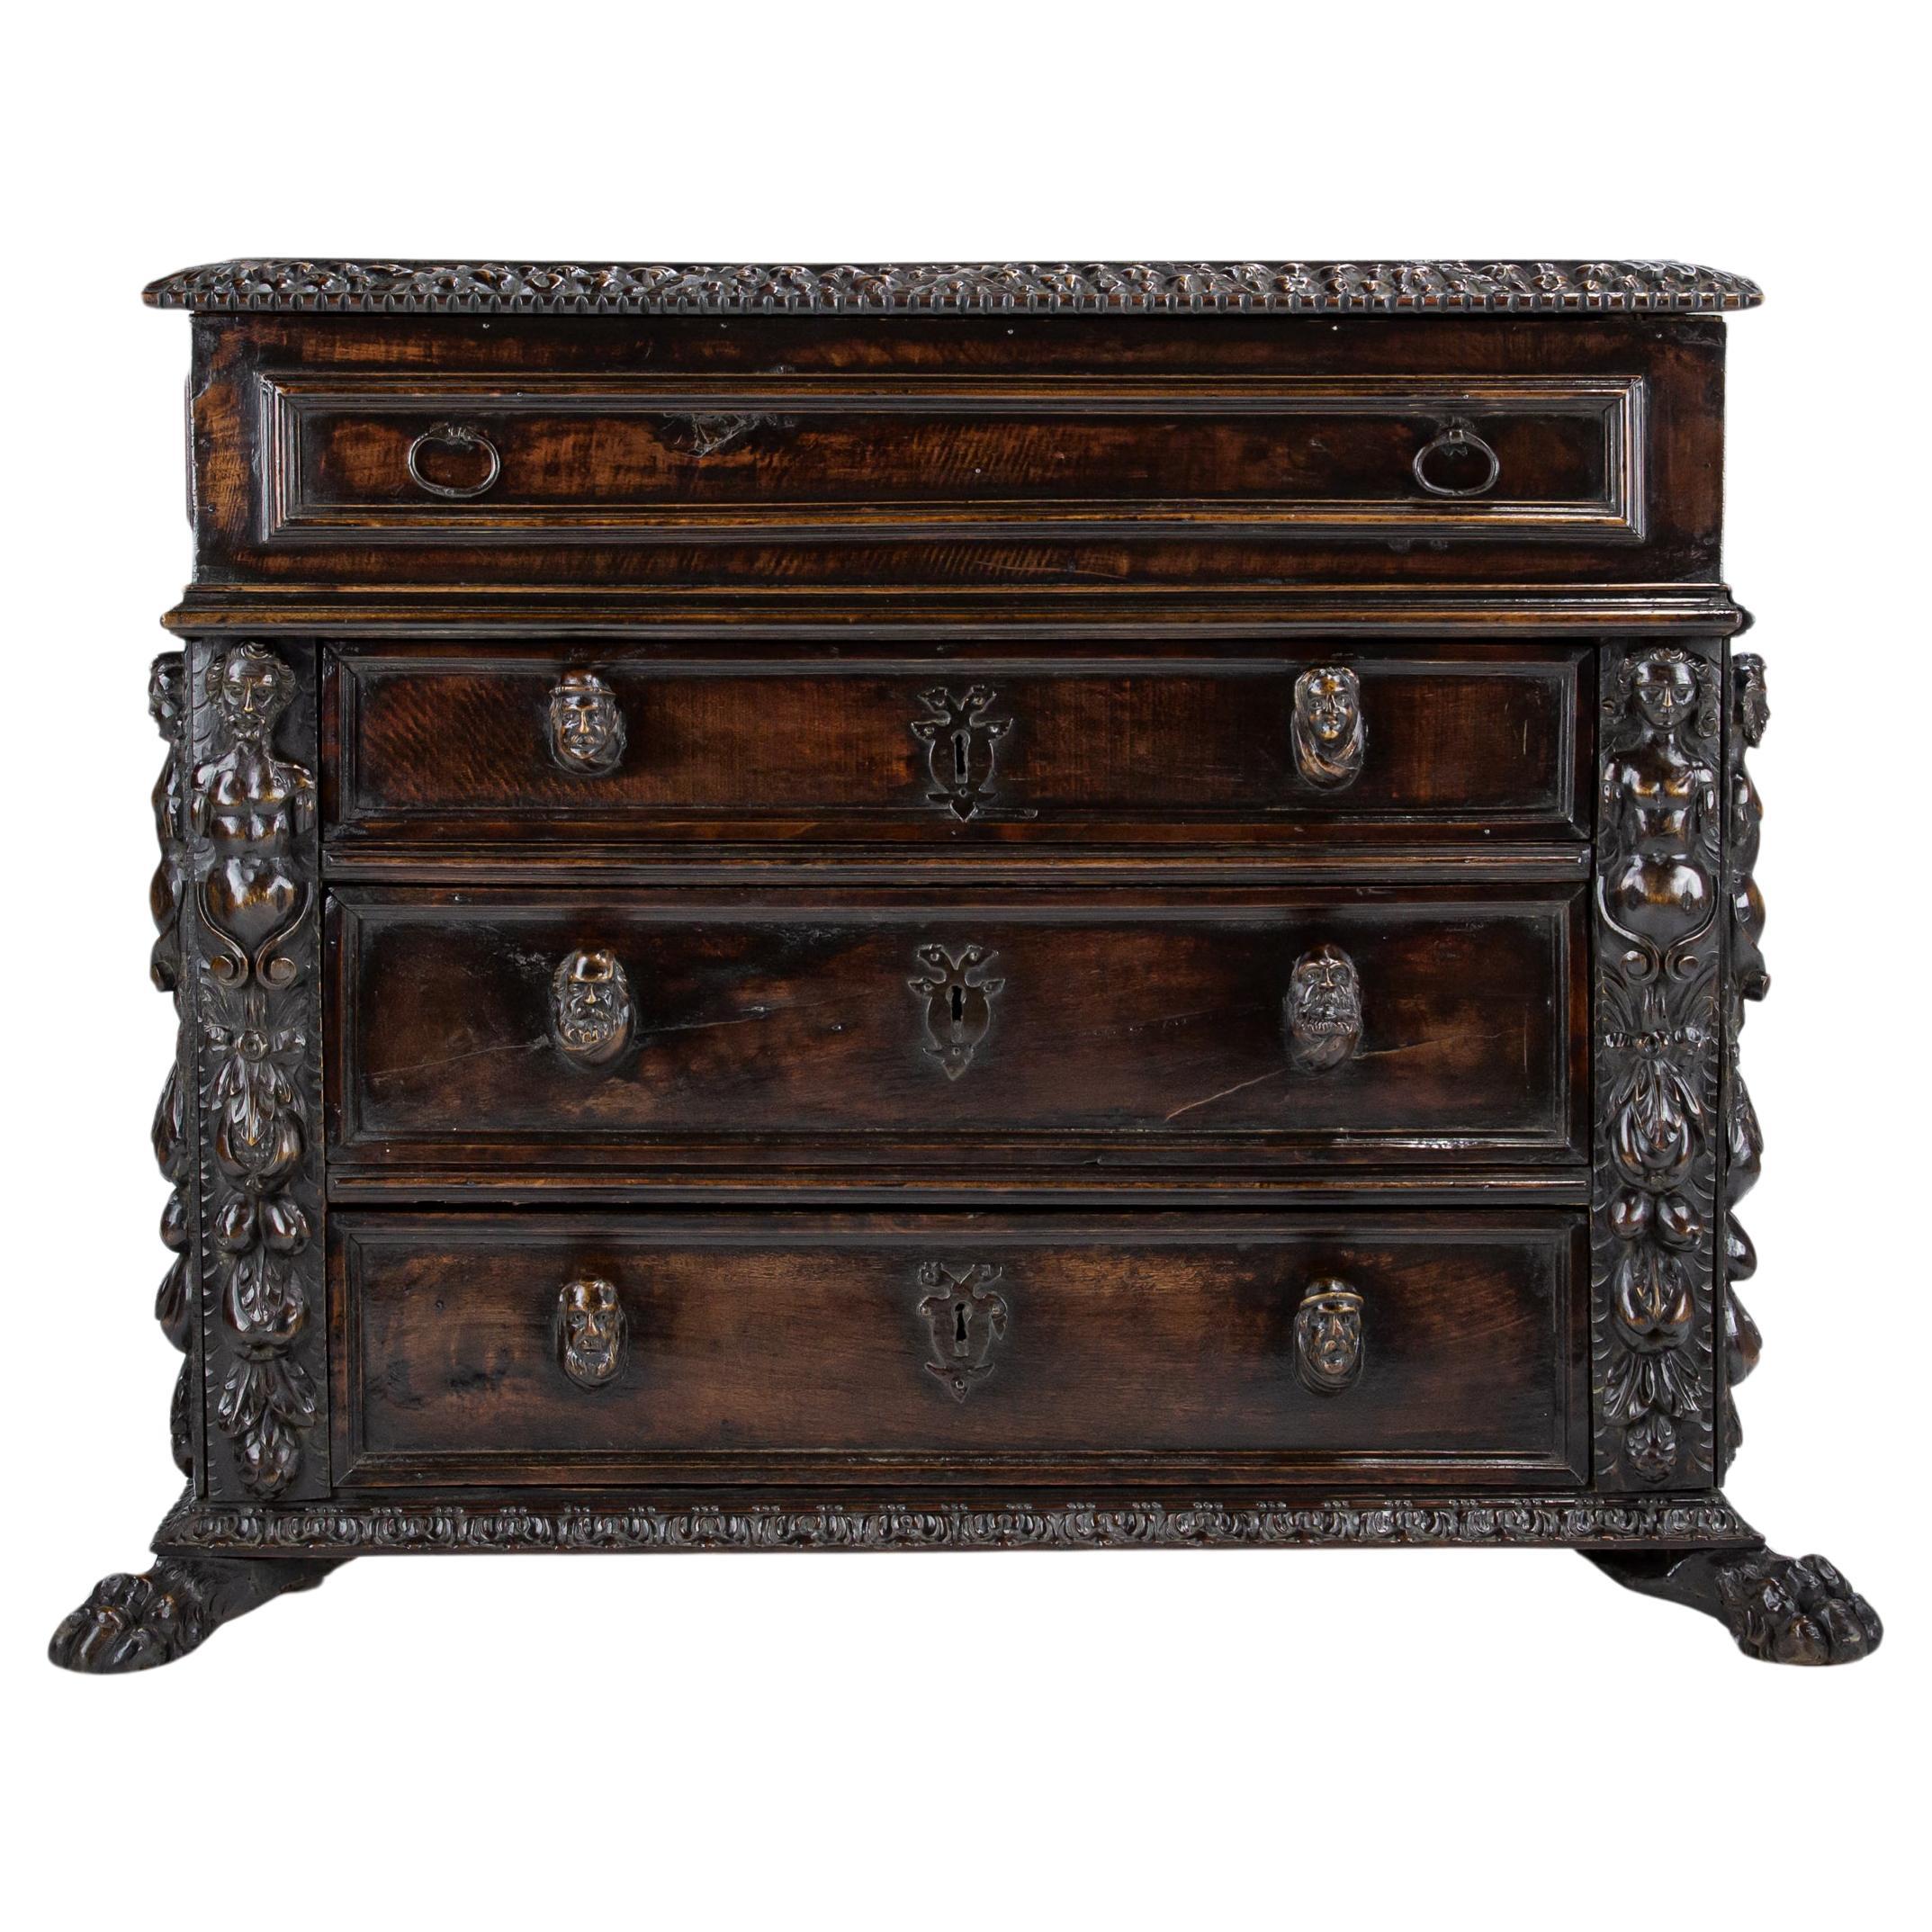 Late 17th or Early 18th Century Walnut Bambocci Commode